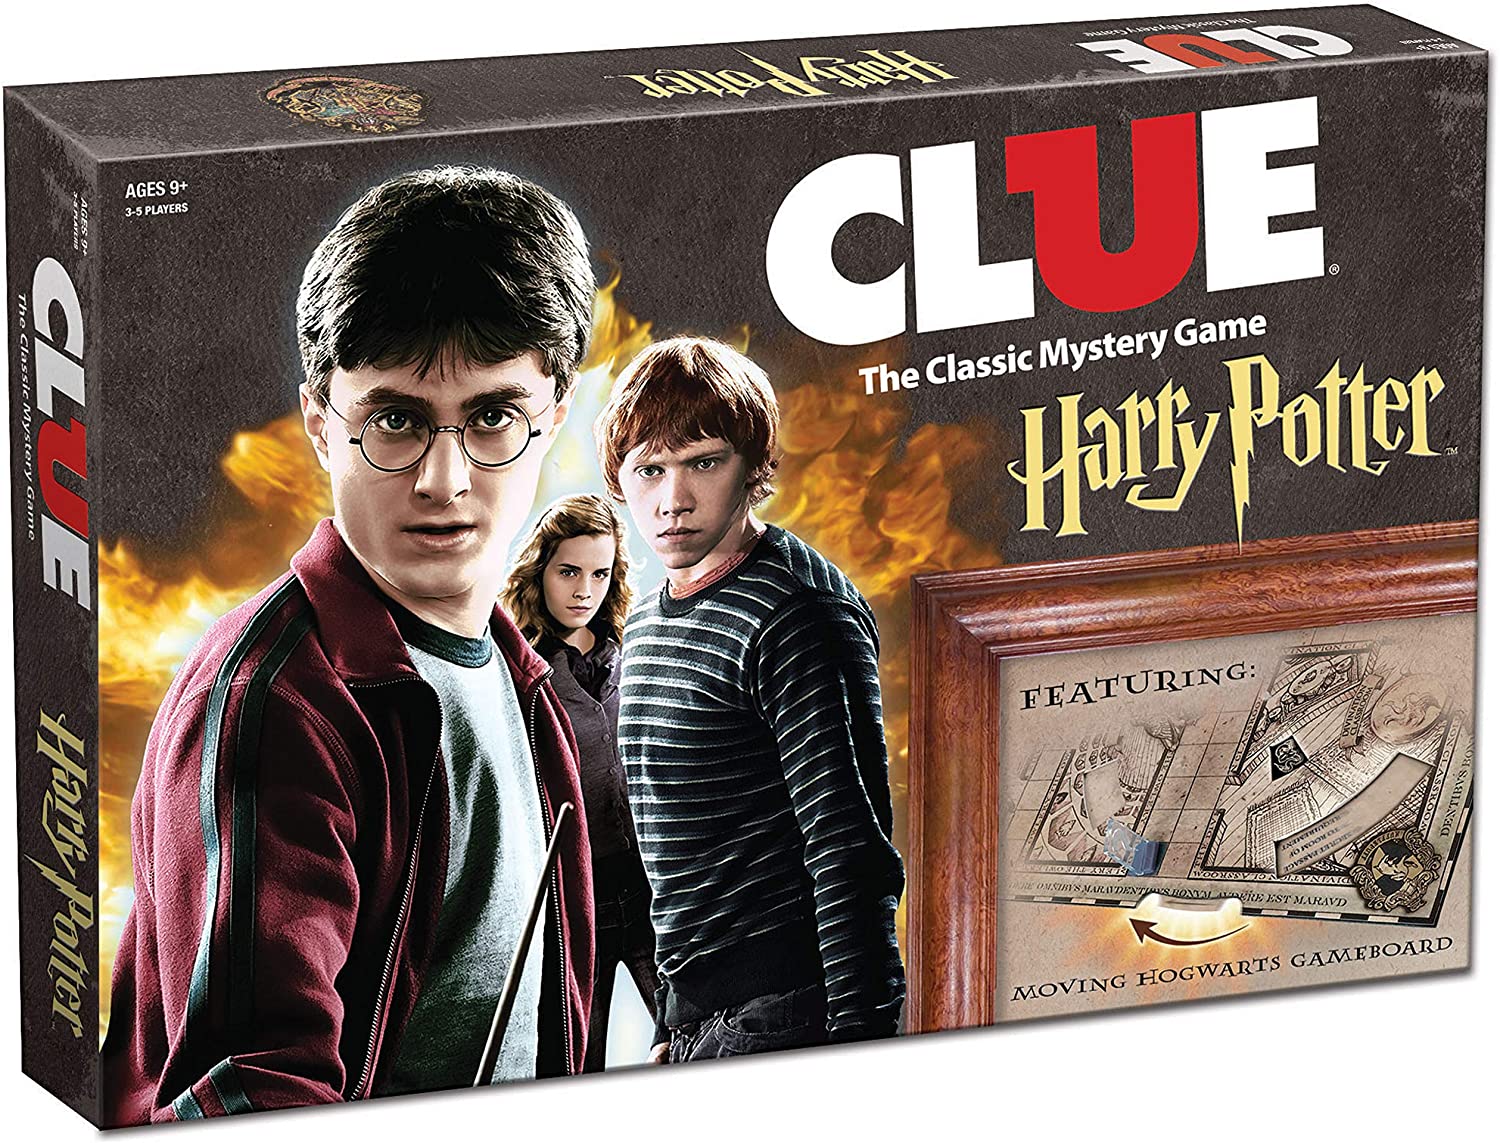 Clue, the Classic Mystery Game Harry Potter